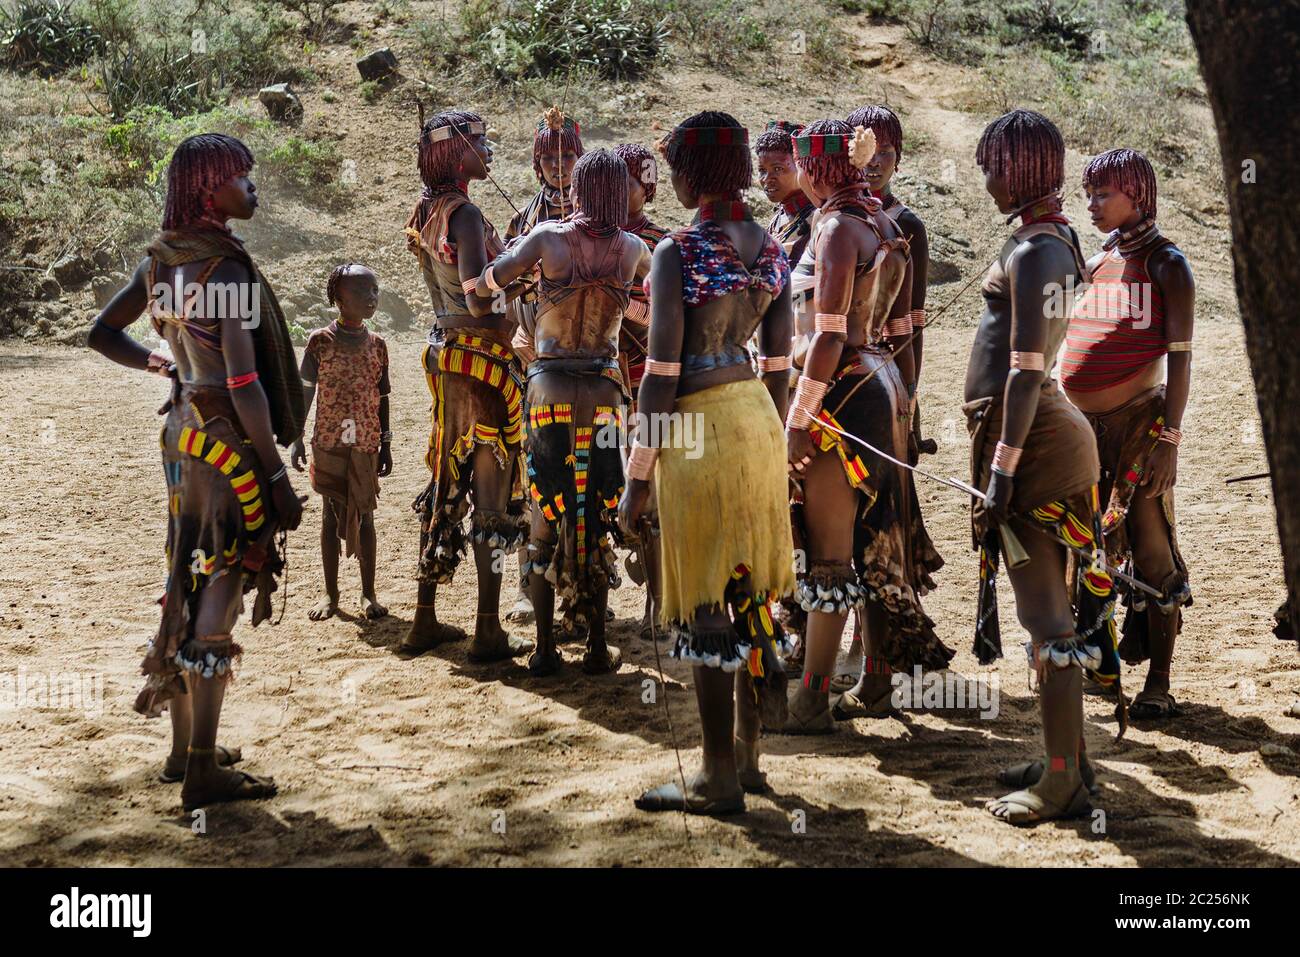 OMO VALLEY, ETHIOPIA -  AUGUST 07 2018: The Bull Jumping Ceremony by the unidentified Hamer tribe members Stock Photo